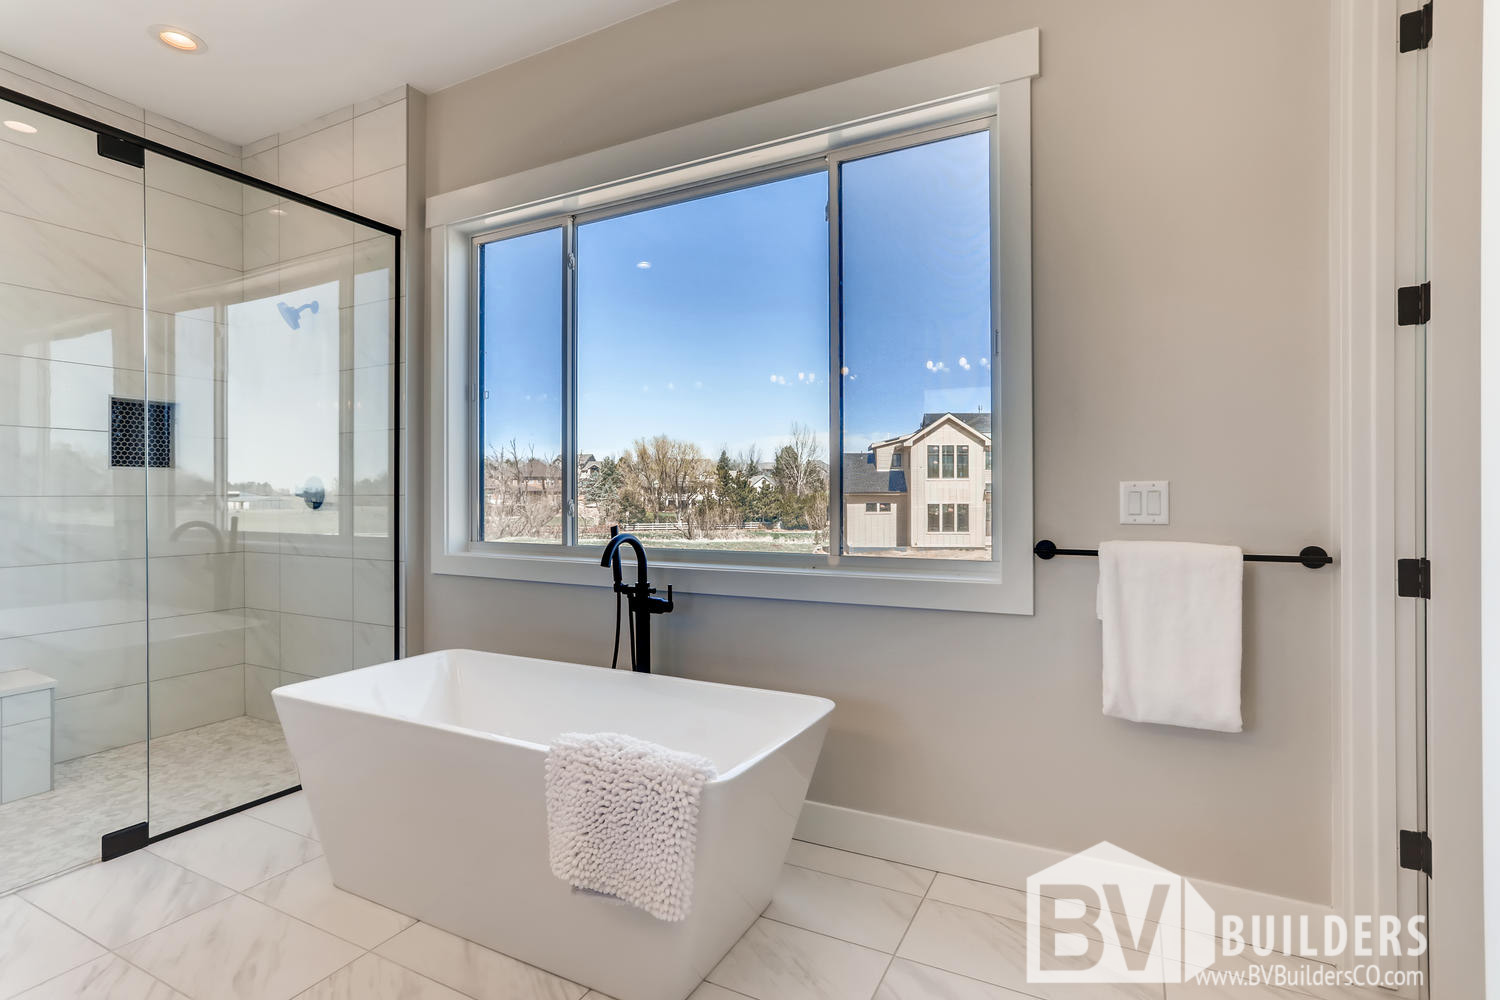 Modern farmhouse master bathroom with soaker tub and glass shower door